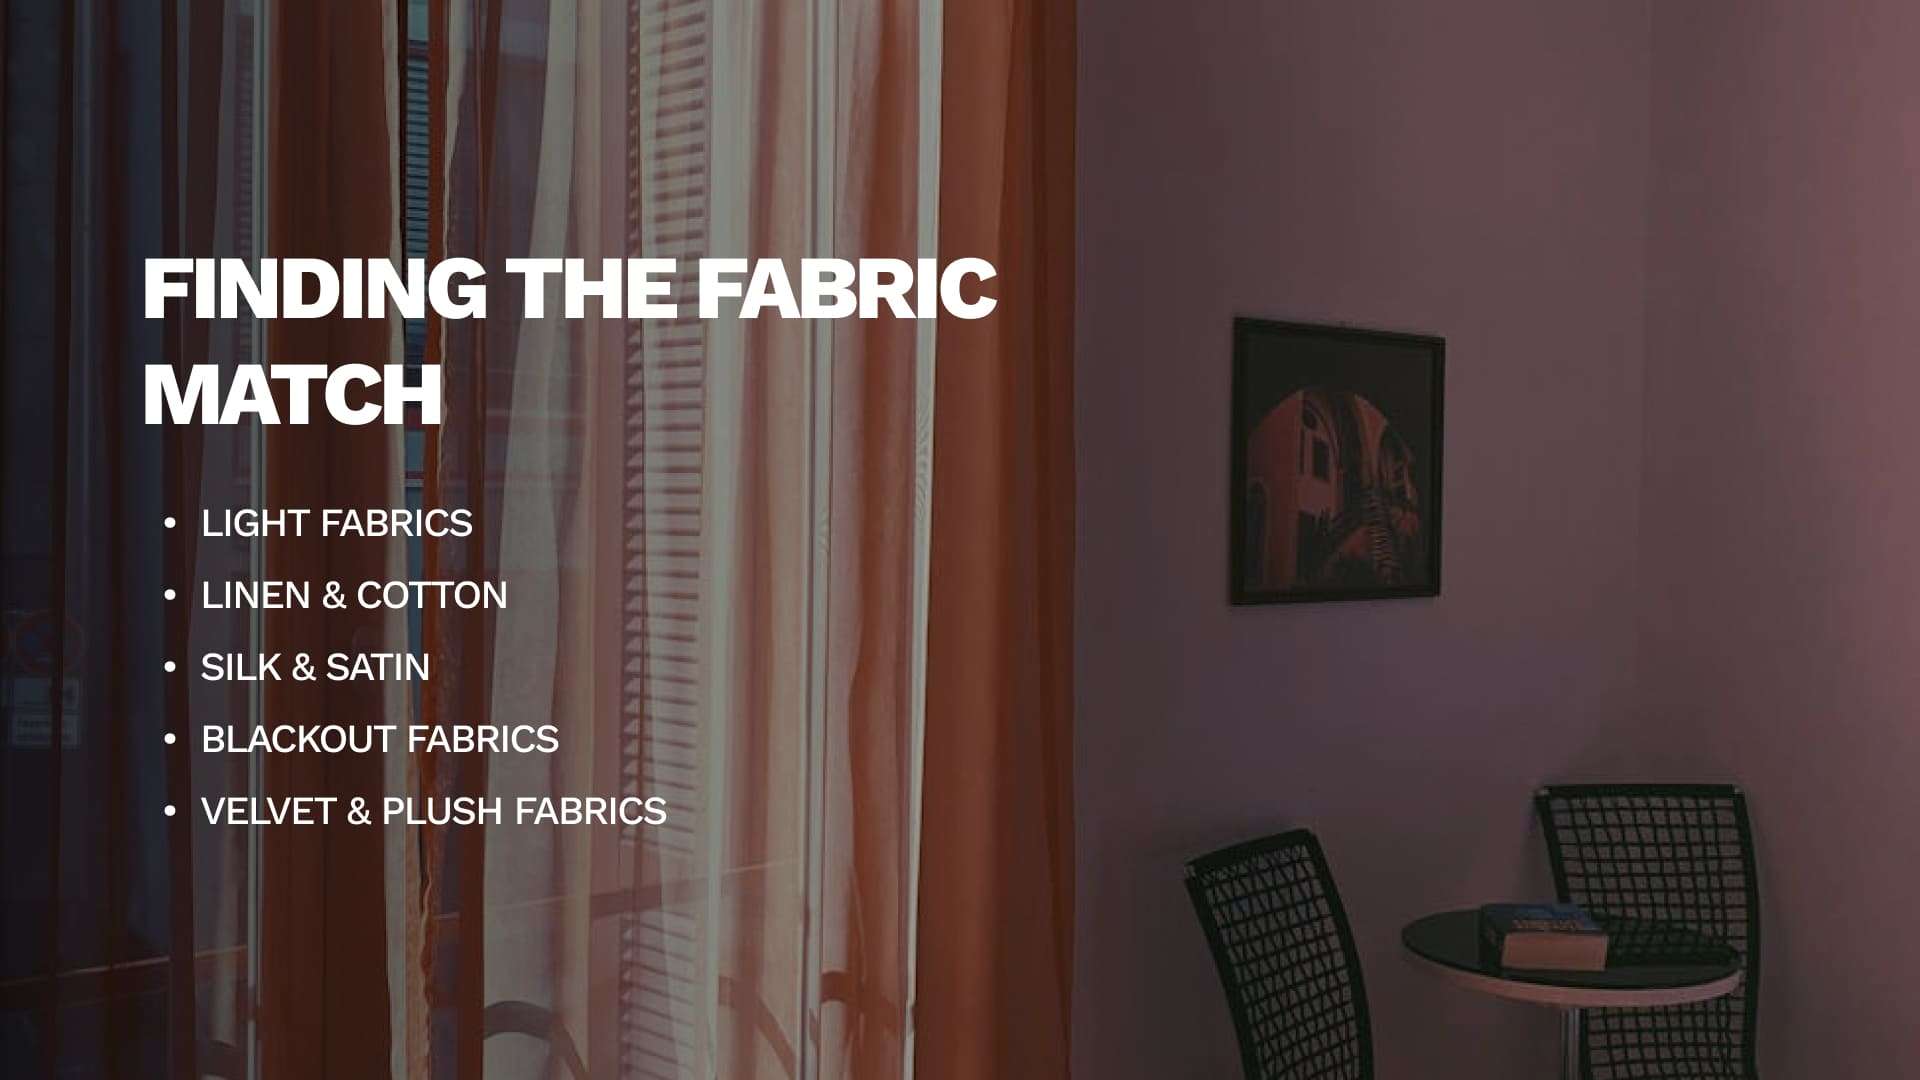 Finding the Fabric Match